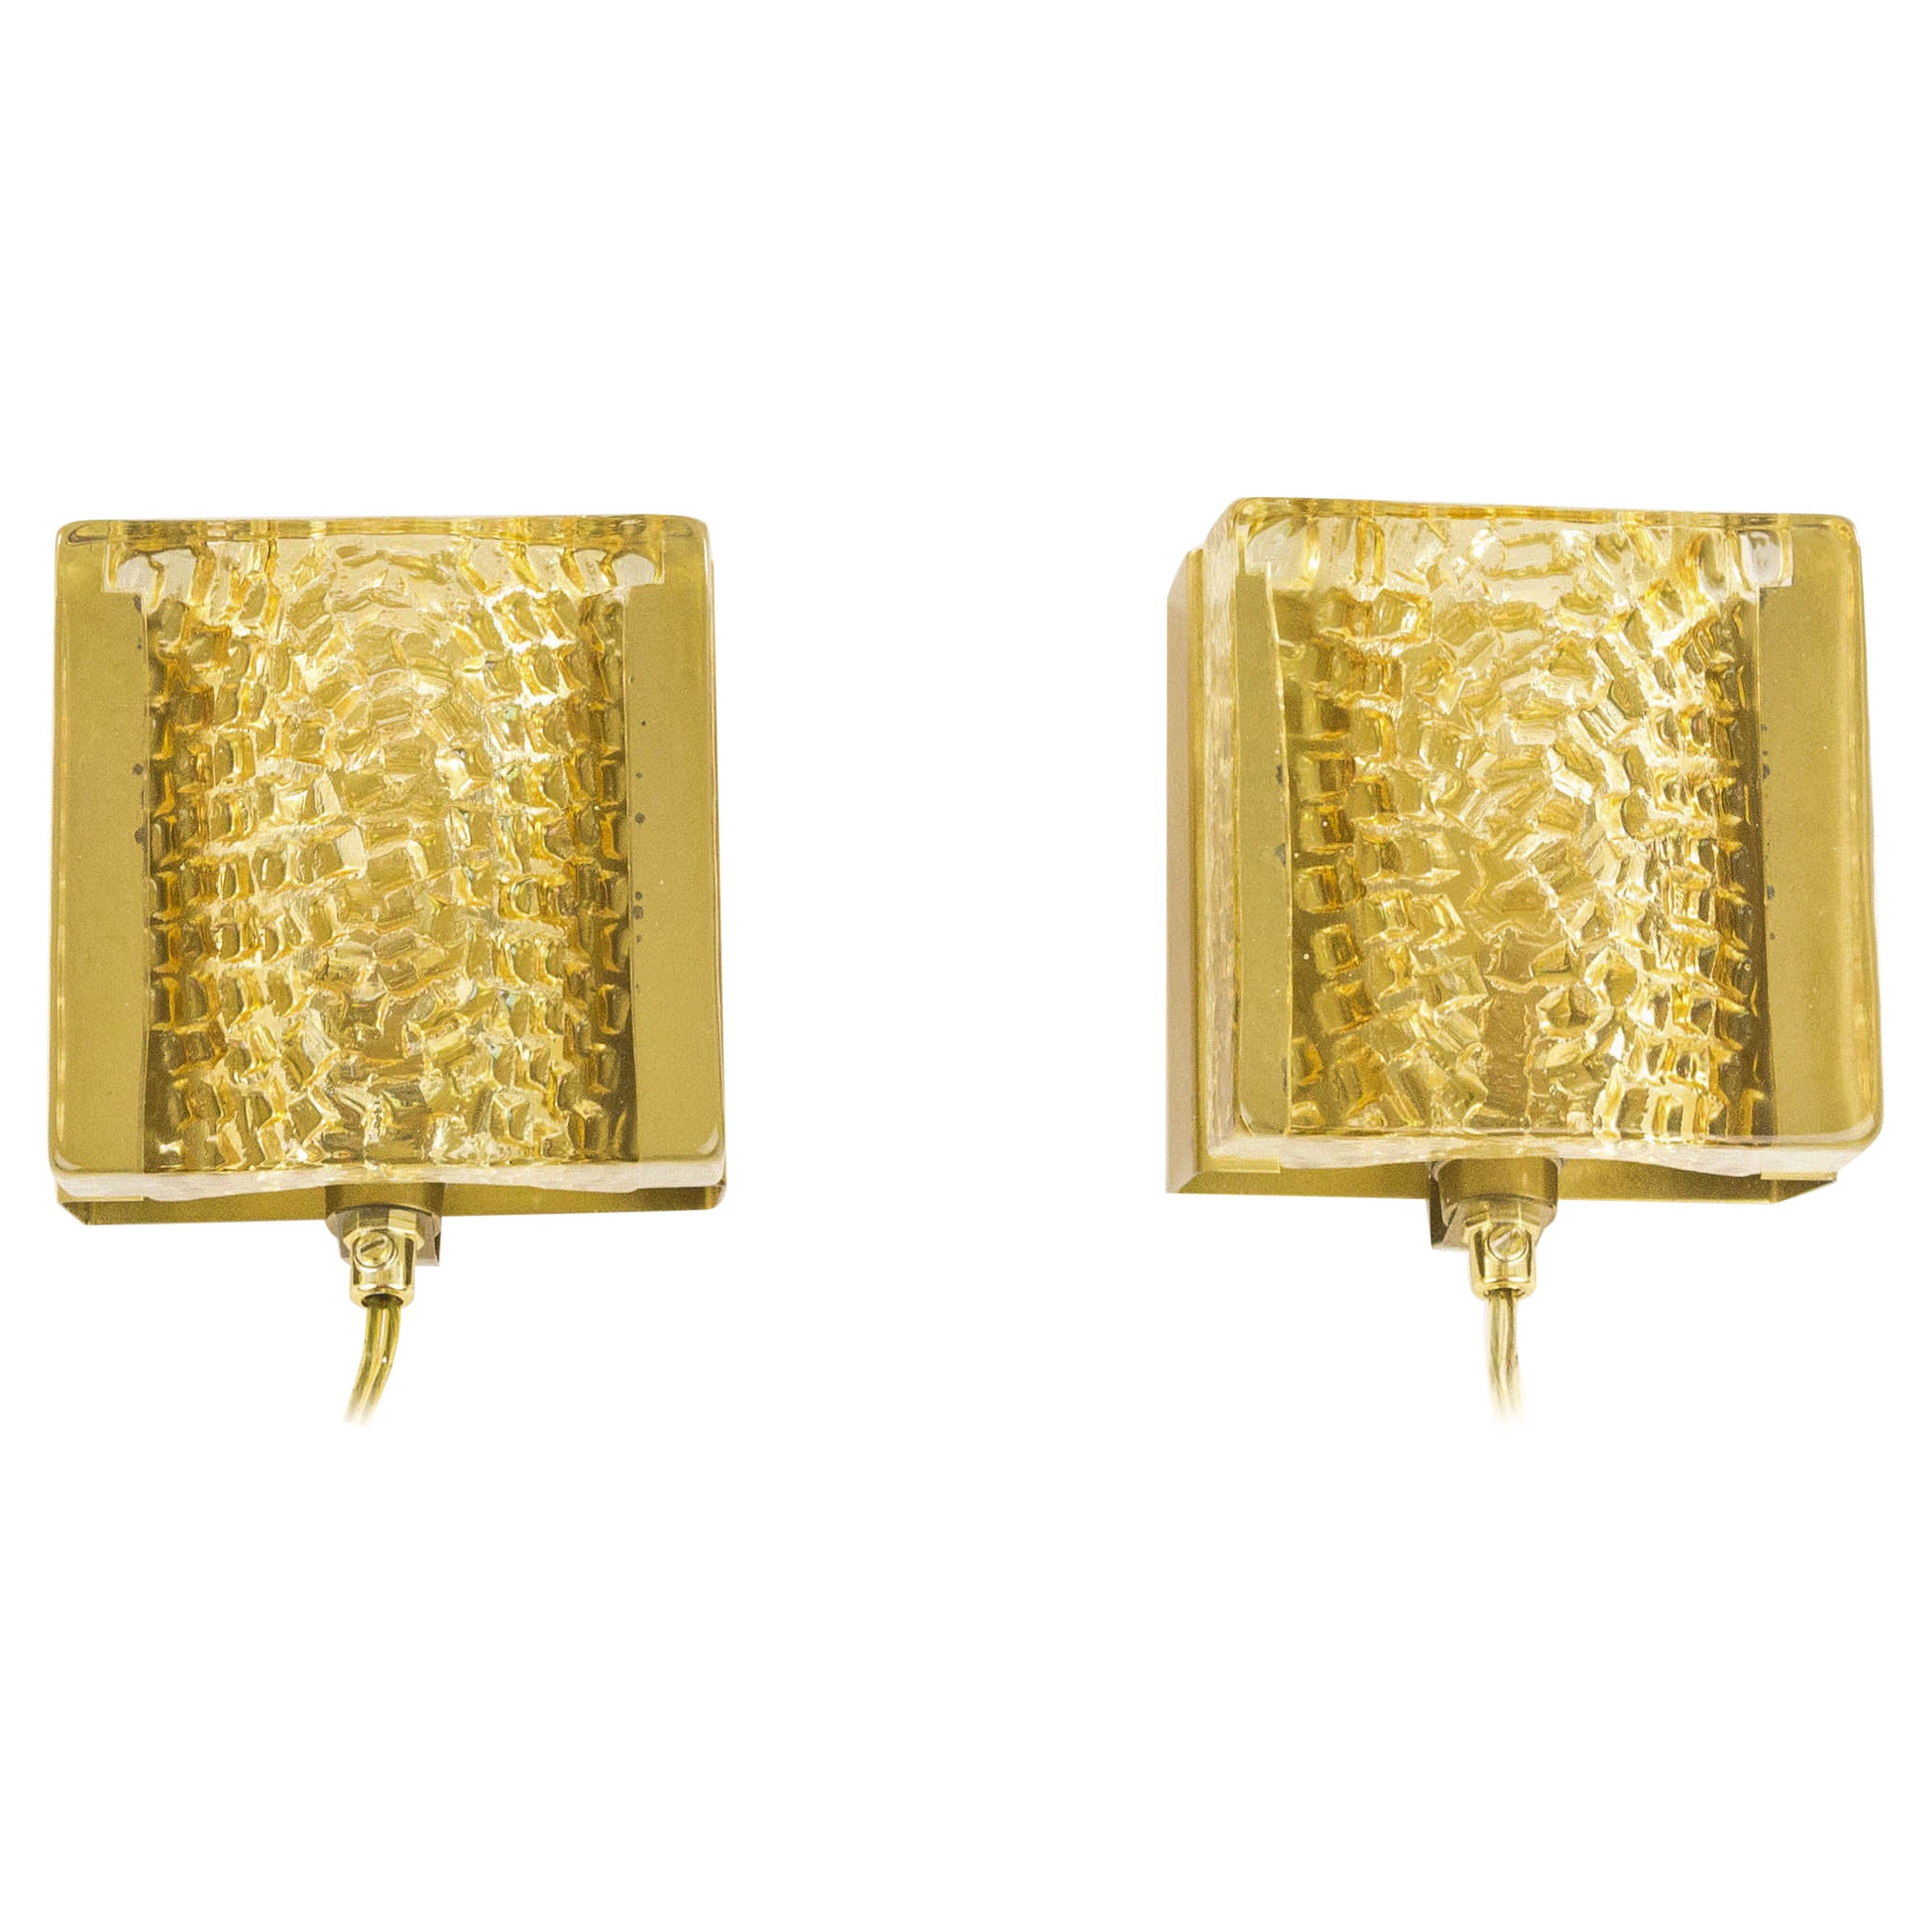 Pair of Kalmar glass and brass Wall lamps in gold by Vitrika, 1970s